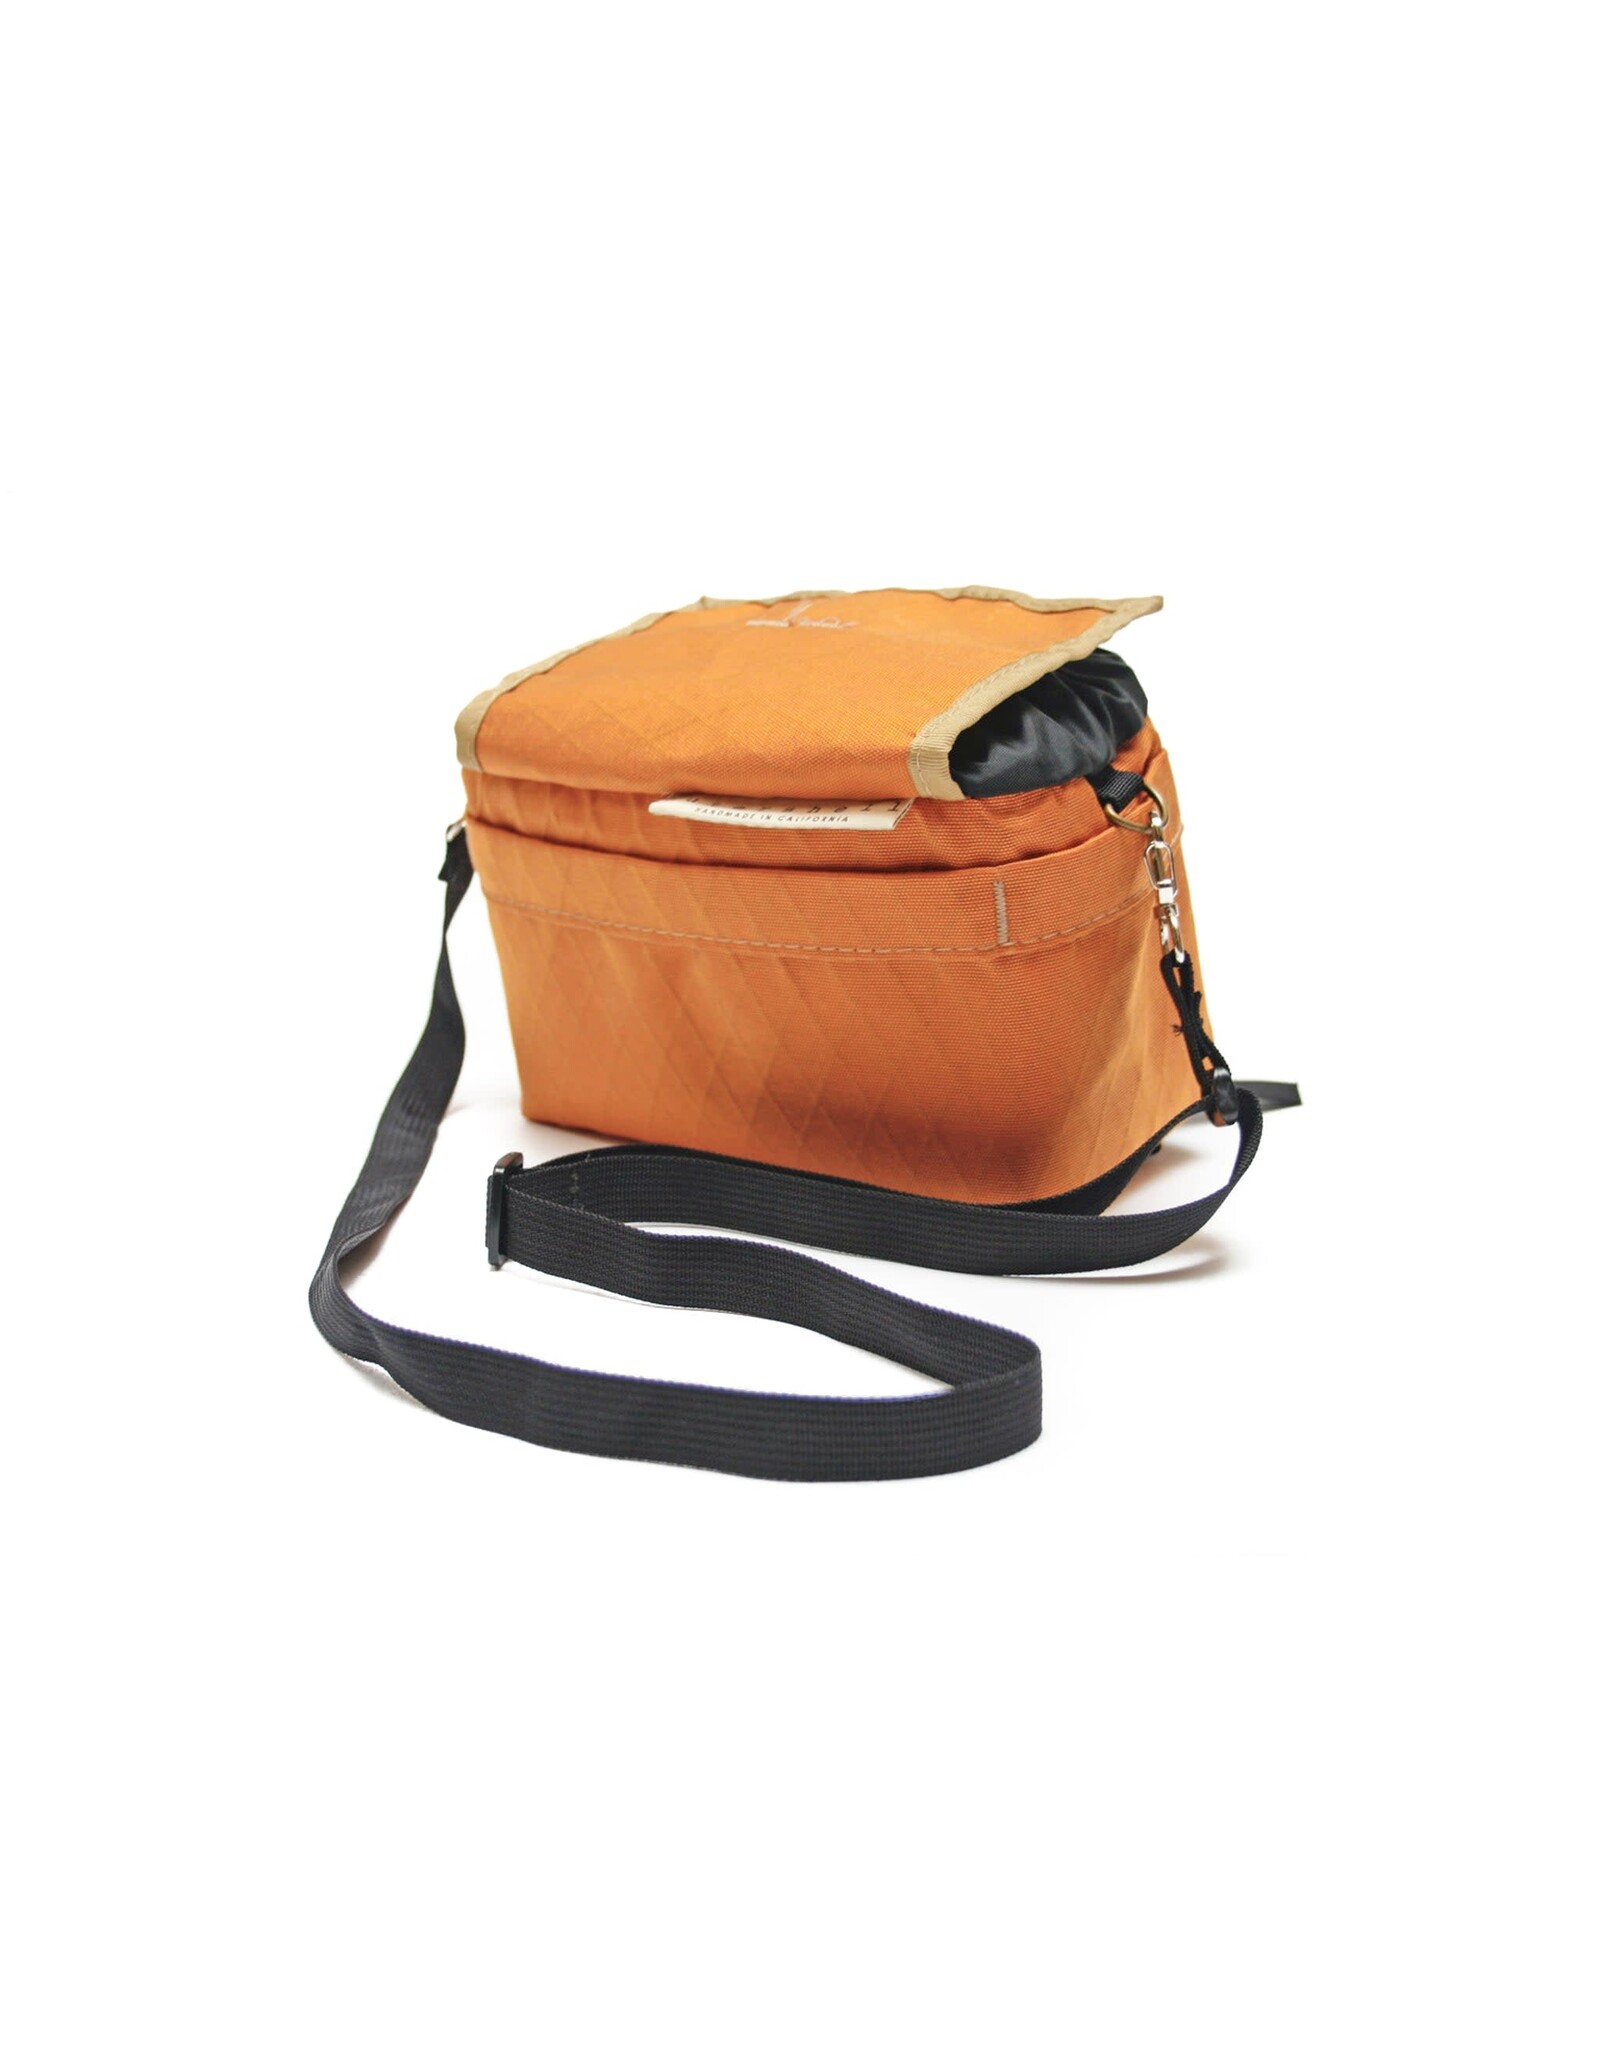 outer shell Outer Shell Shoulder Strap